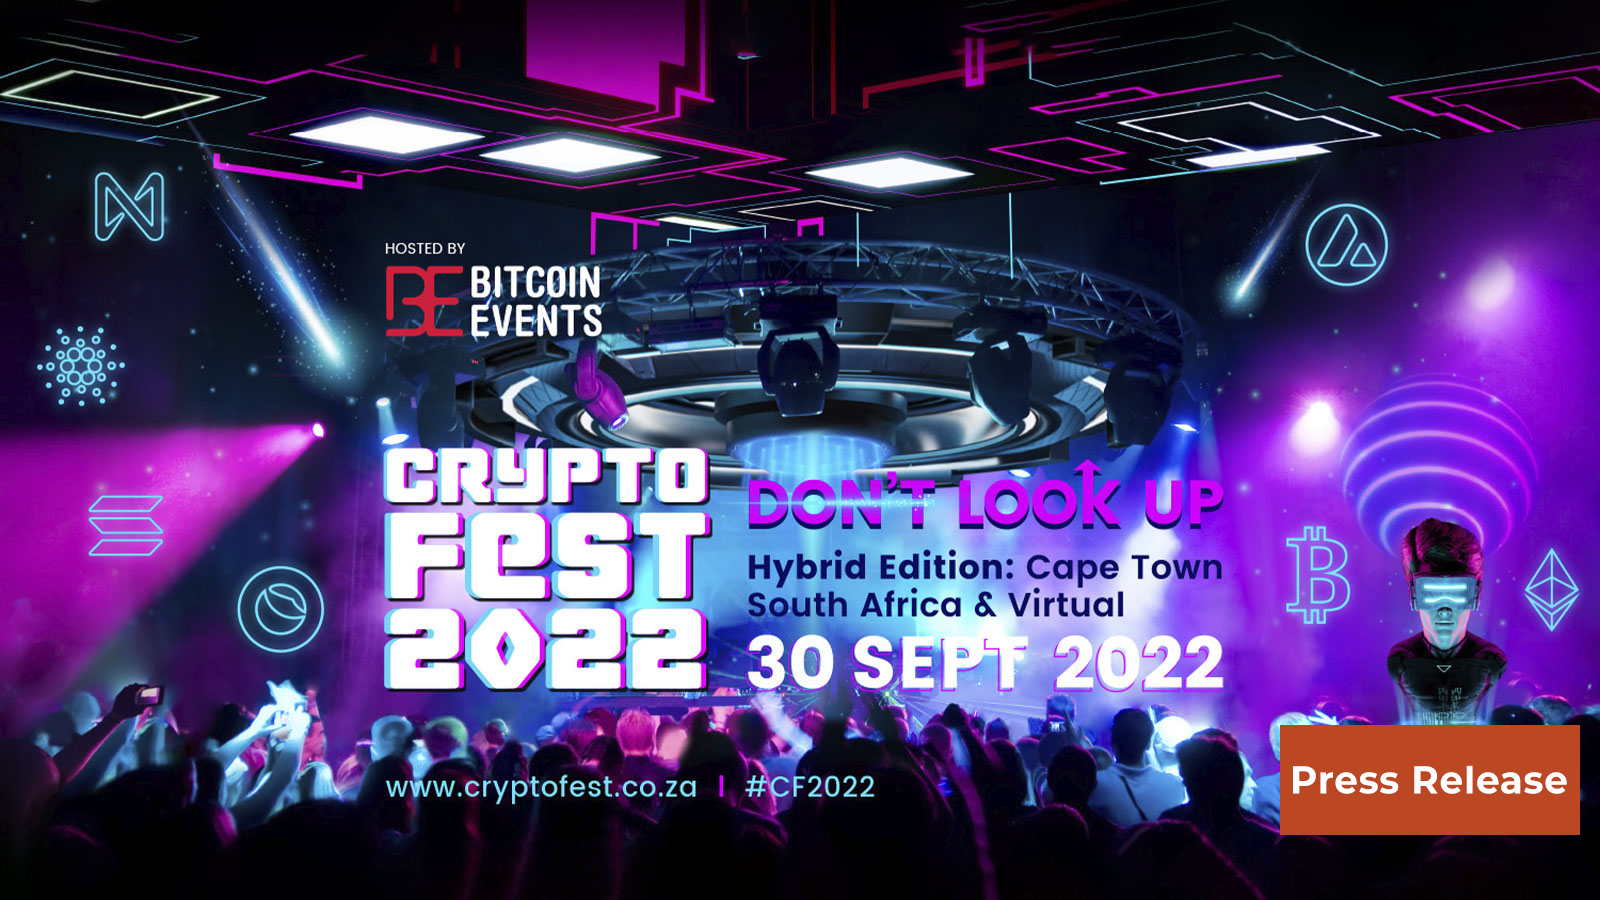 Bitcoin Events Sets the Stage for an Unparalleled Experience at Crypto